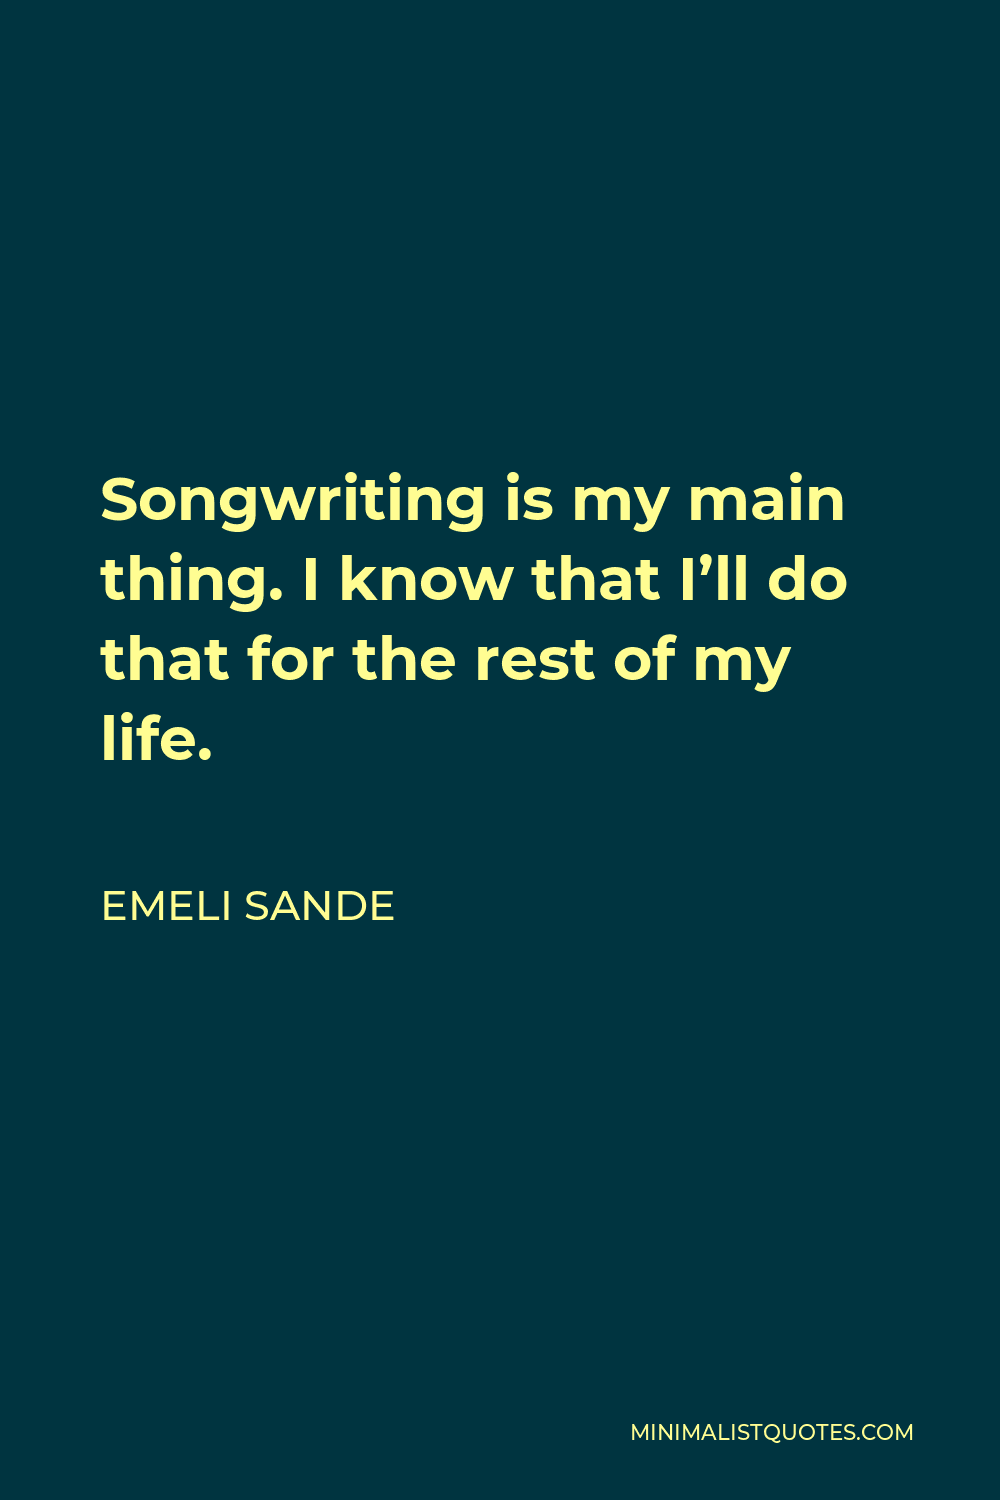 Emeli Sande Quote - Songwriting is my main thing. I know that I’ll do that for the rest of my life.